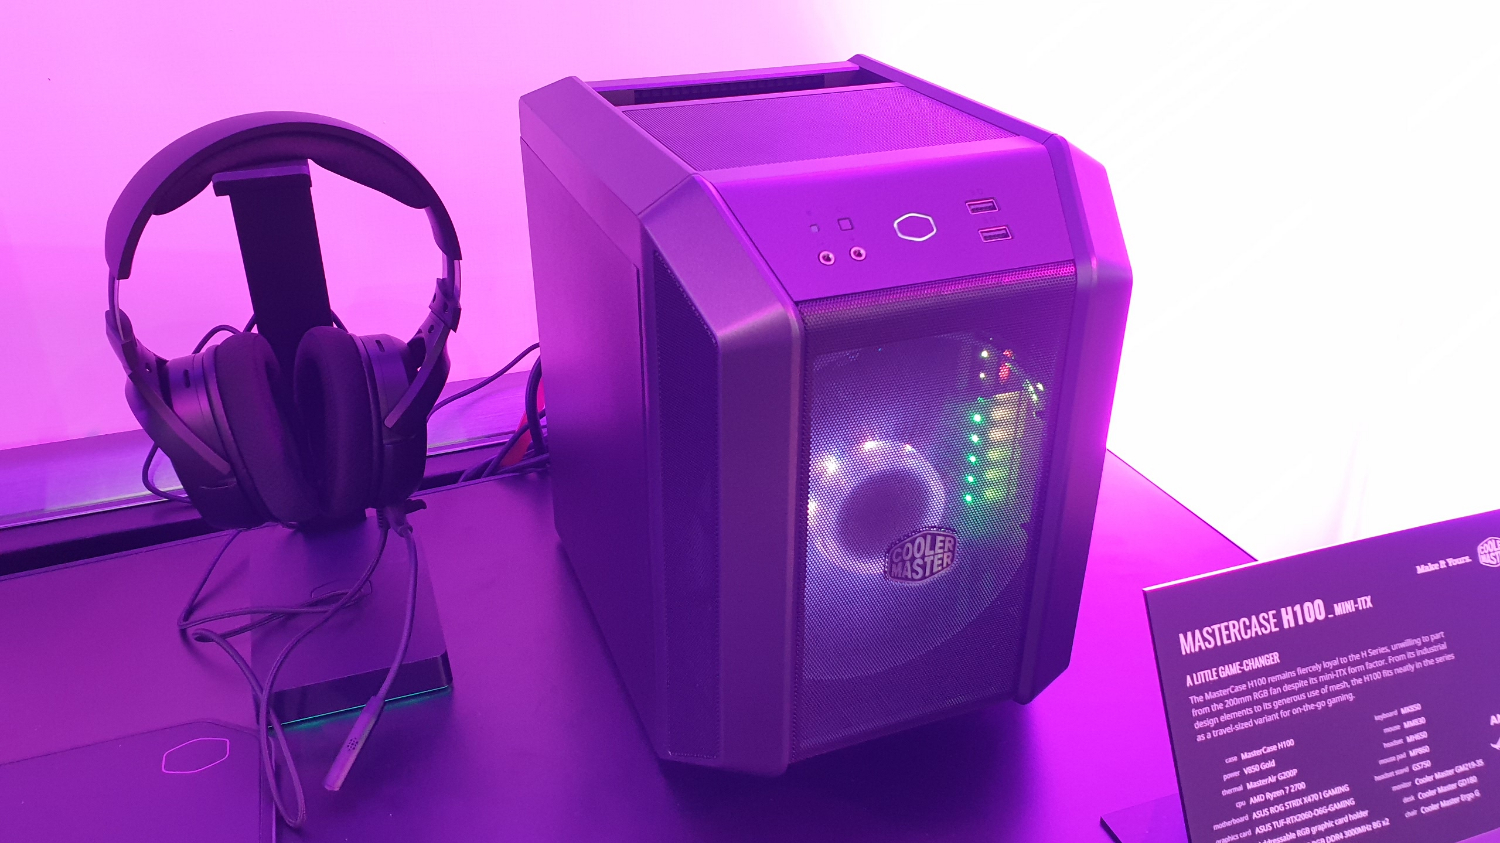 Cooler Master MasterCase H100 Is Finally Here And Sports A Minimalistic Design With  200mm RGB Fan